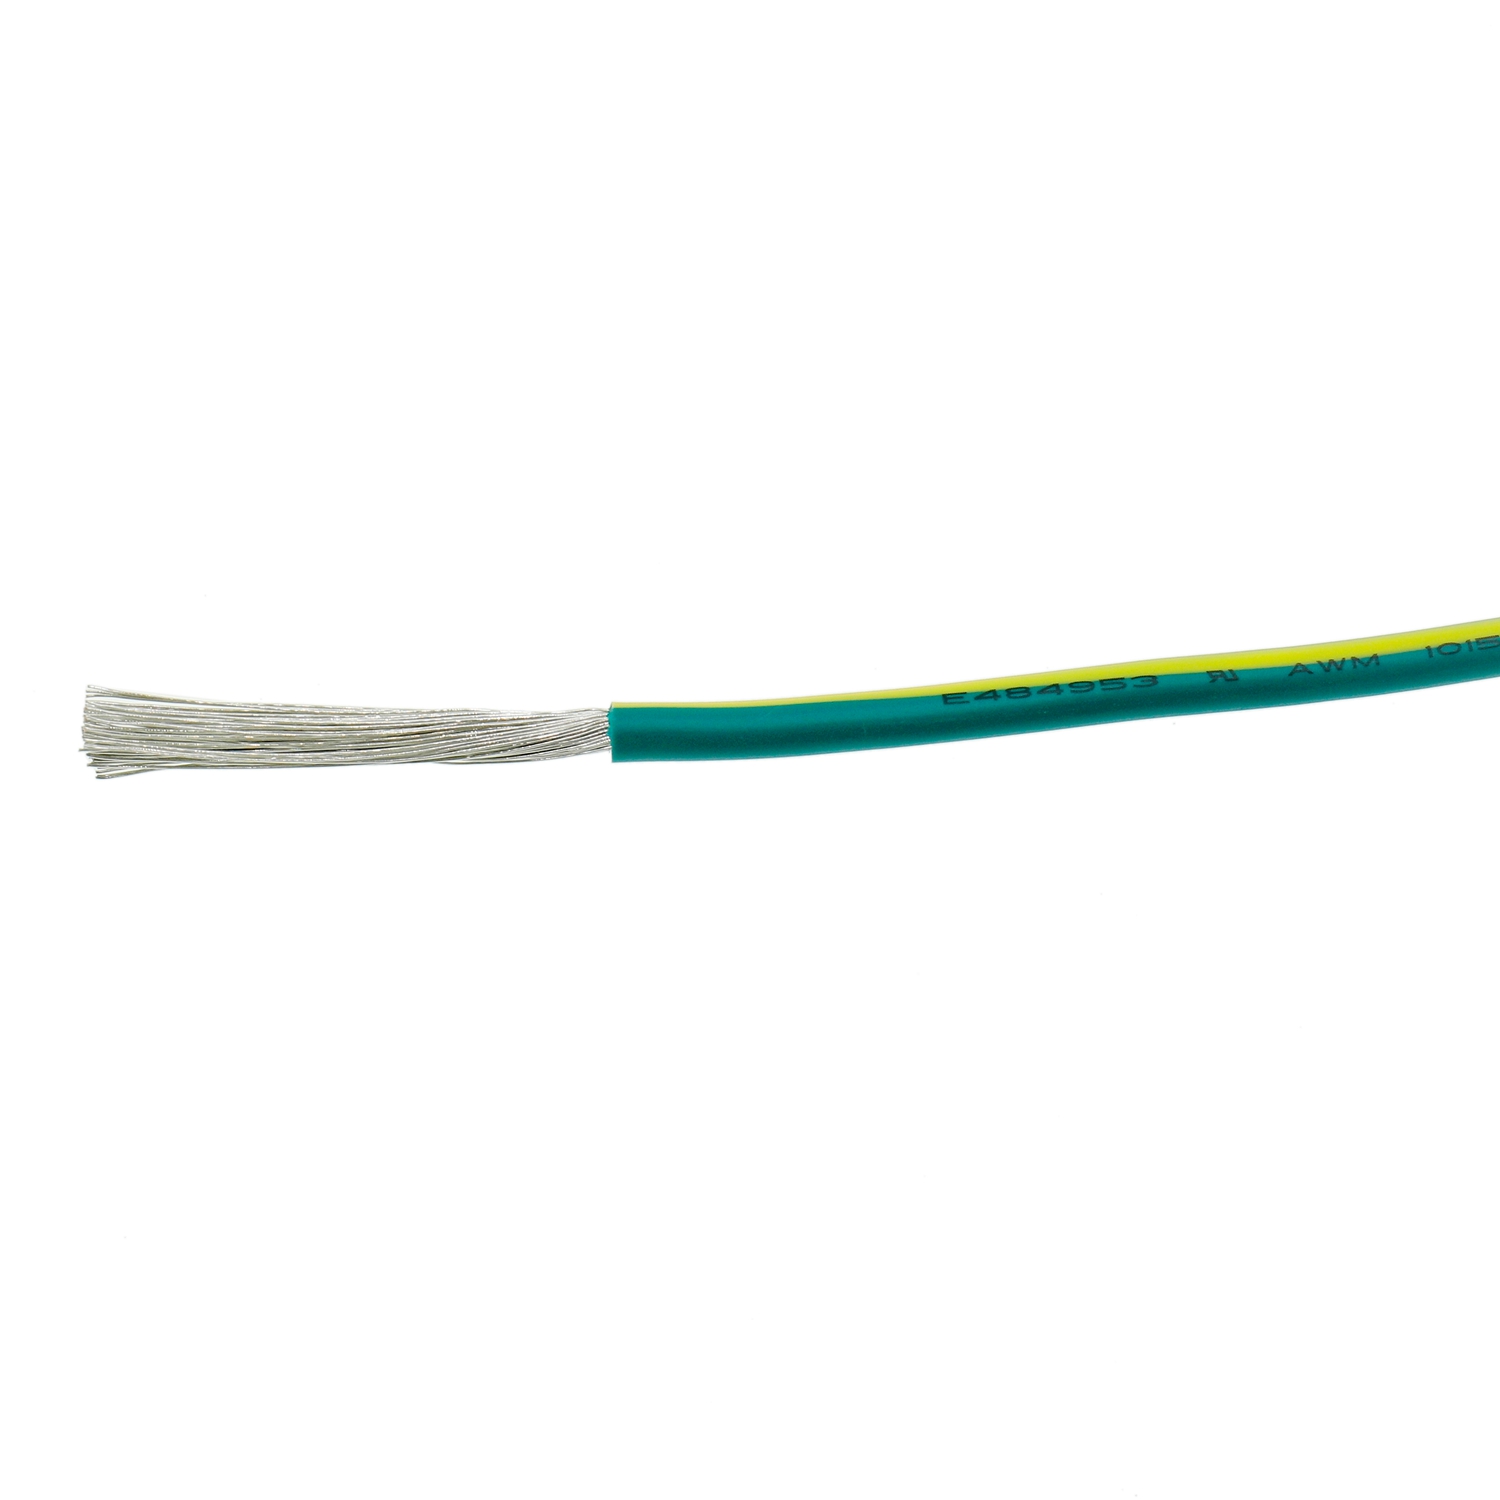 UL1015 8AWG Electrical Power Cable Yellow Green Low Voltage 